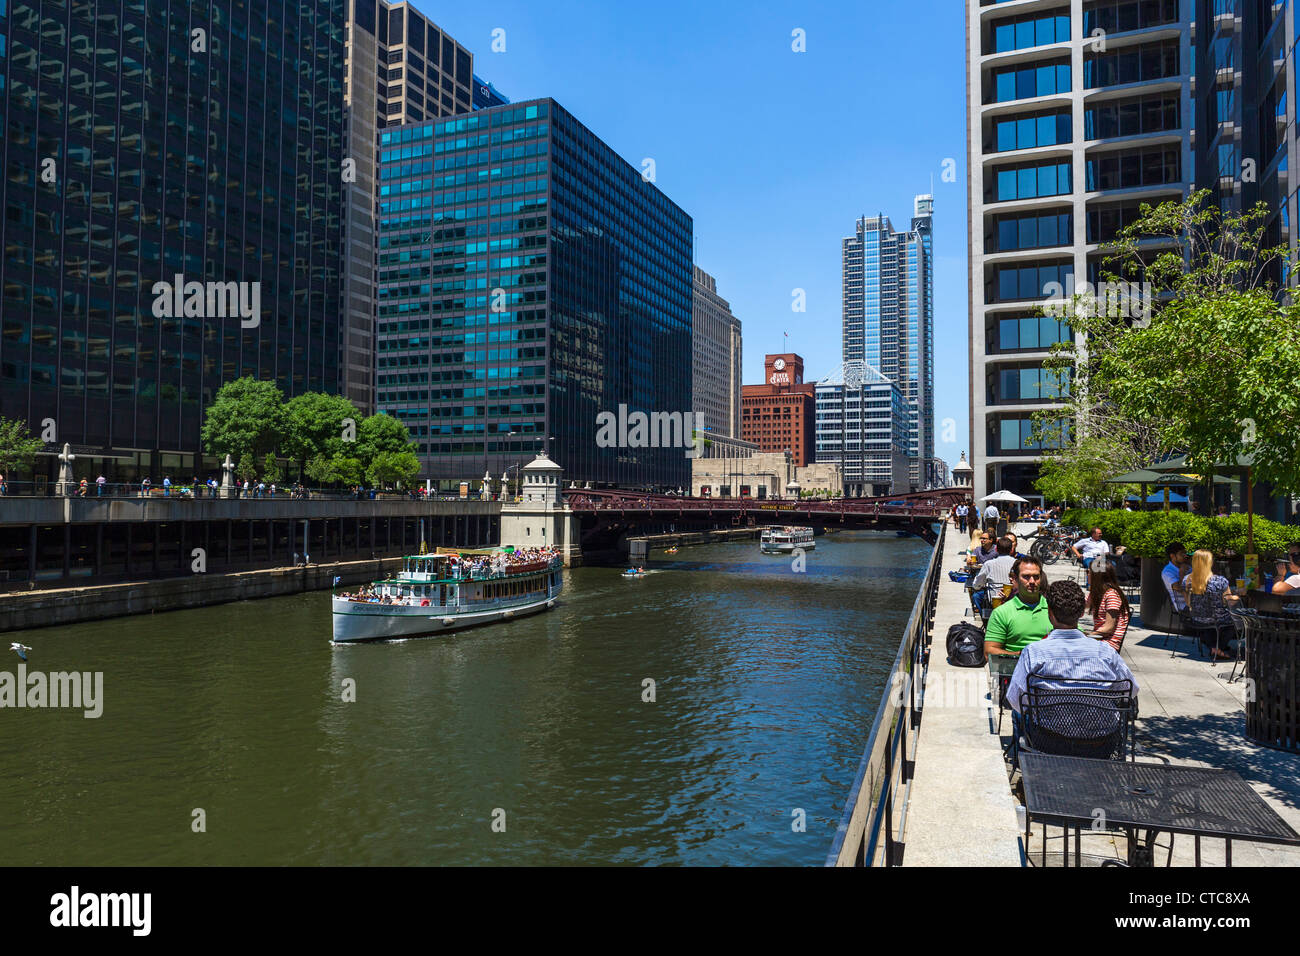 Office workers lunching on restaurant terrace overlooking Chicago River with Monroe Street Bridge behind, Chicago, Illinois, USA Stock Photo